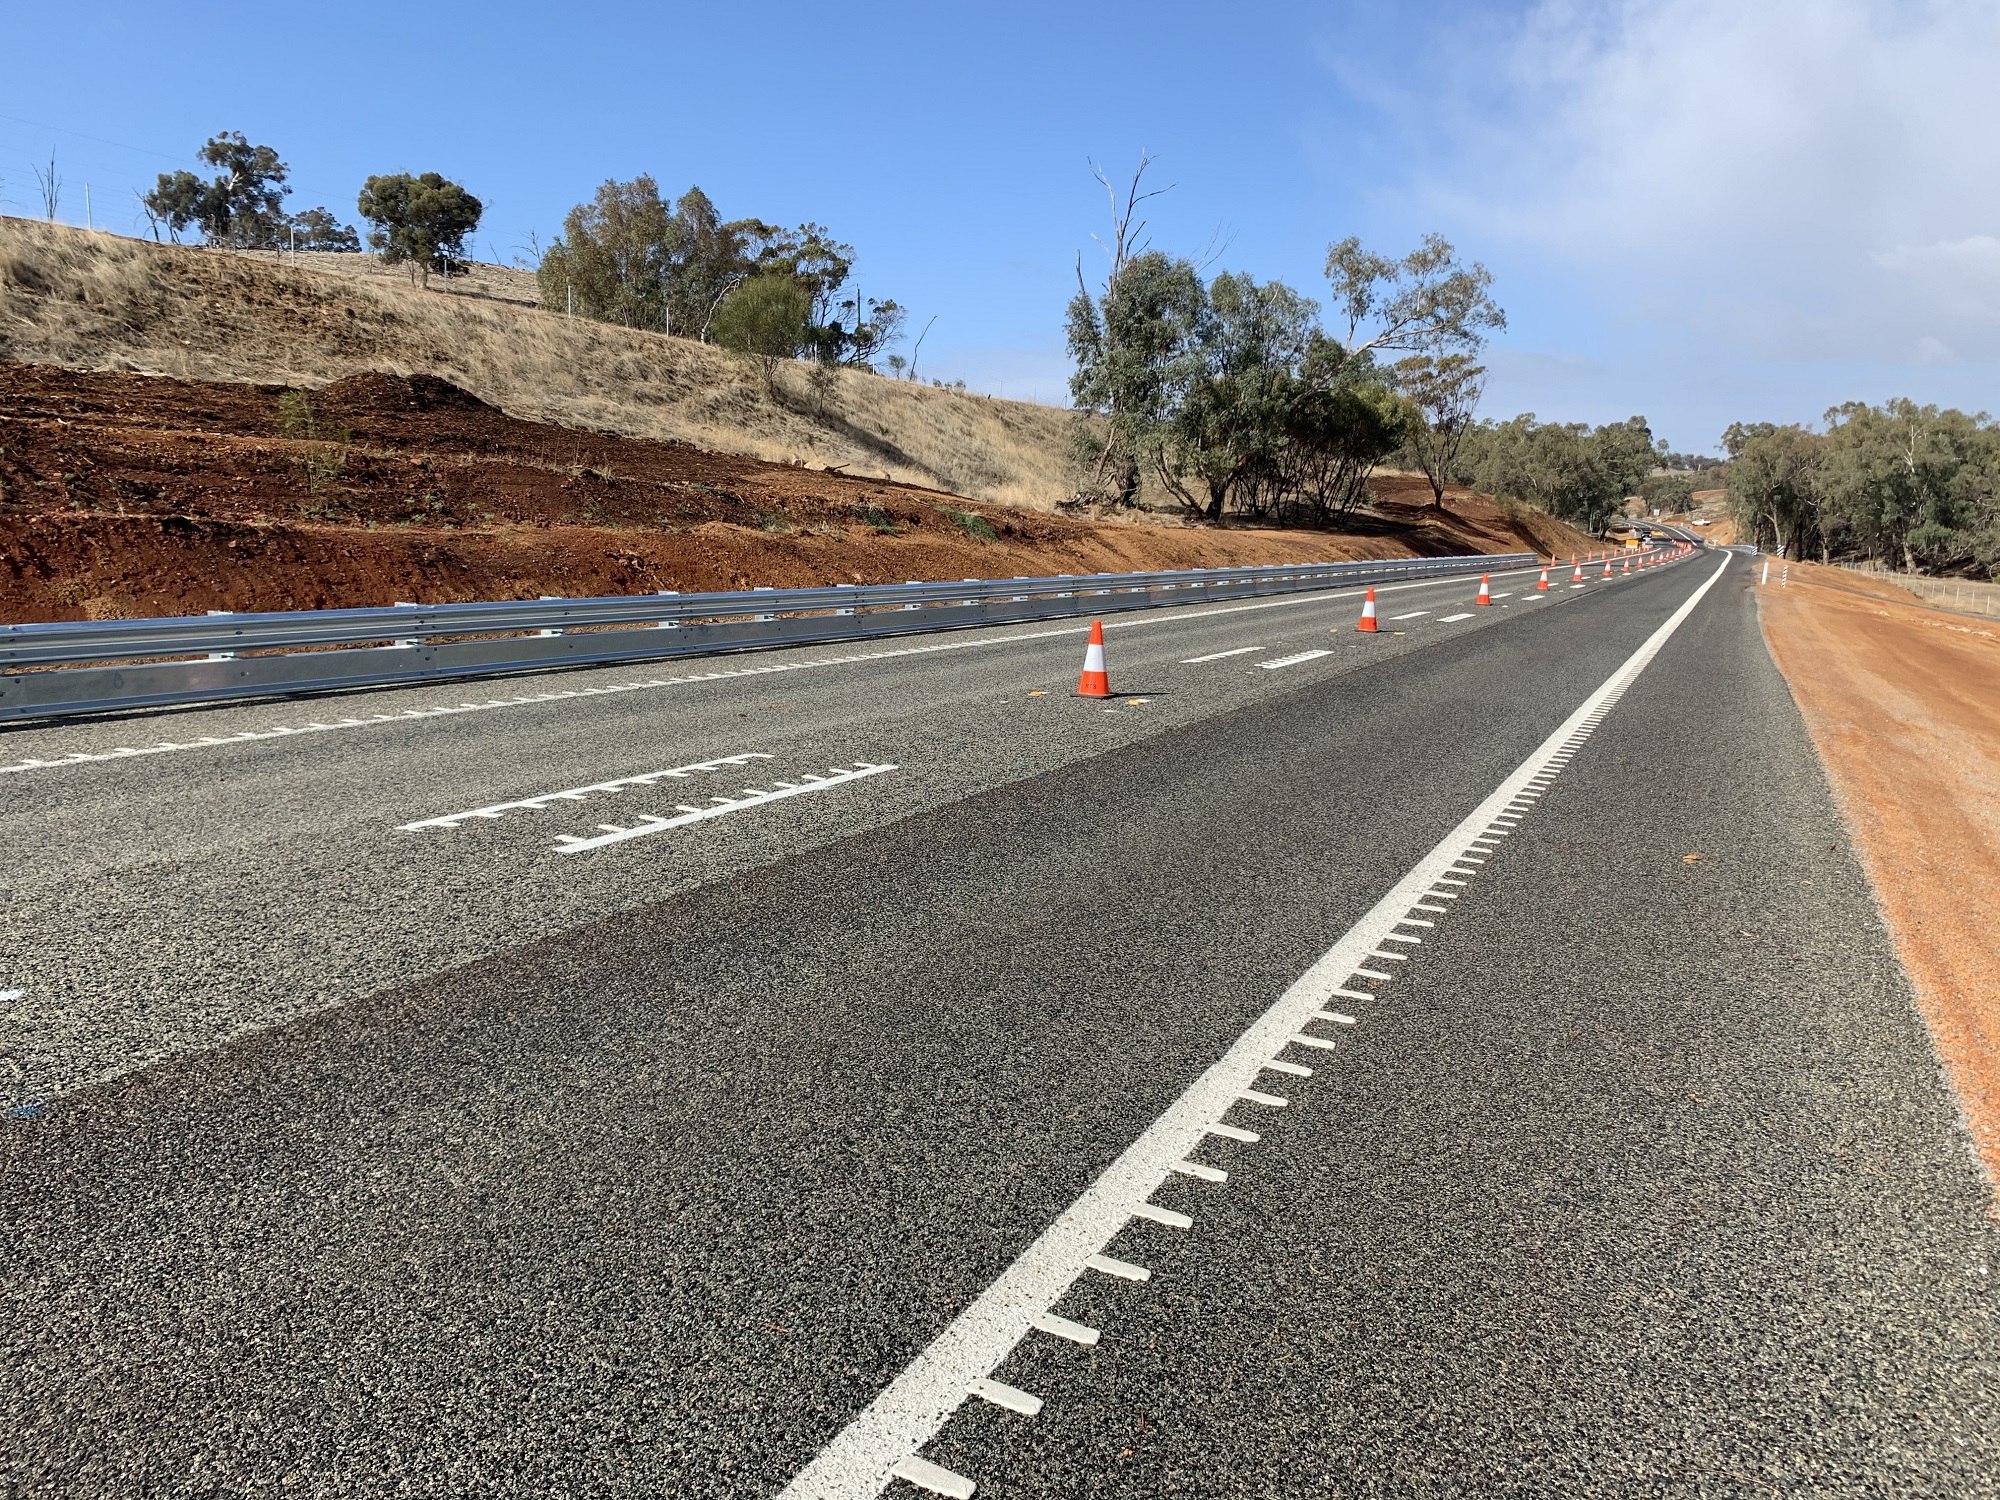 Construction cones in the middle of Toodyay road